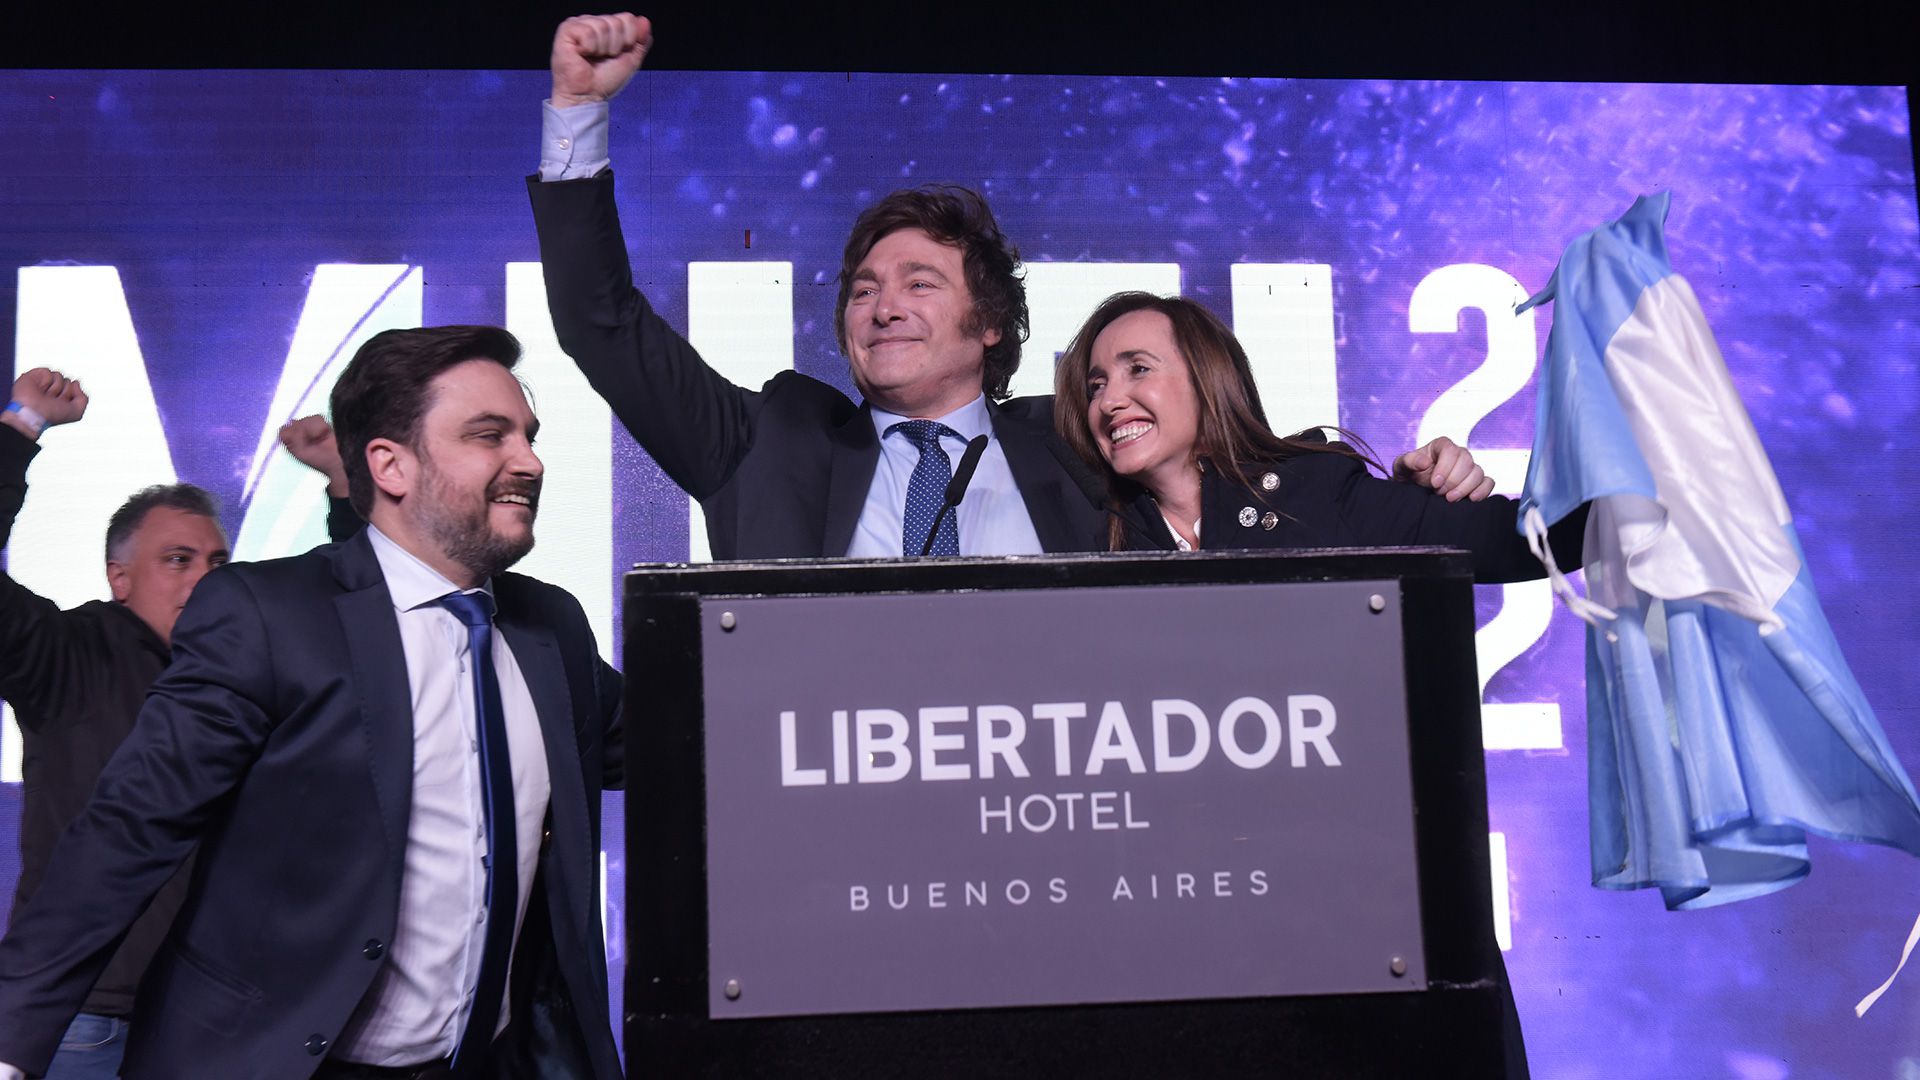 After positioning himself as the winner in these STEP, Milei took the stage with his running mate and who ran as a candidate for Buenos Aires Head of Government Gustavo Gavotti